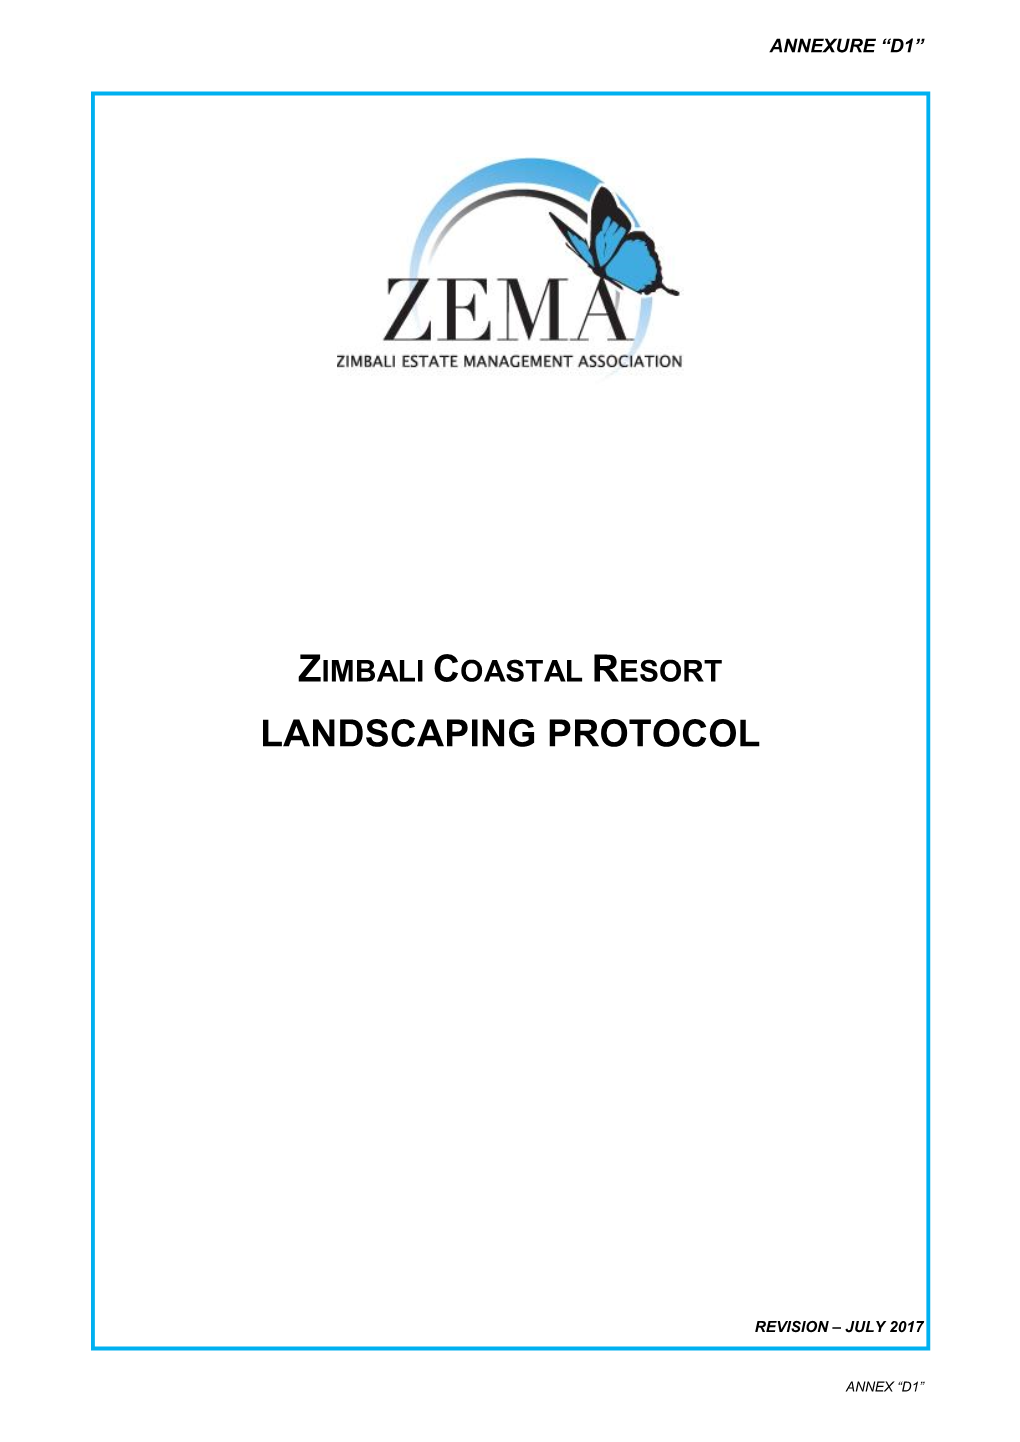 Landscaping Protocol